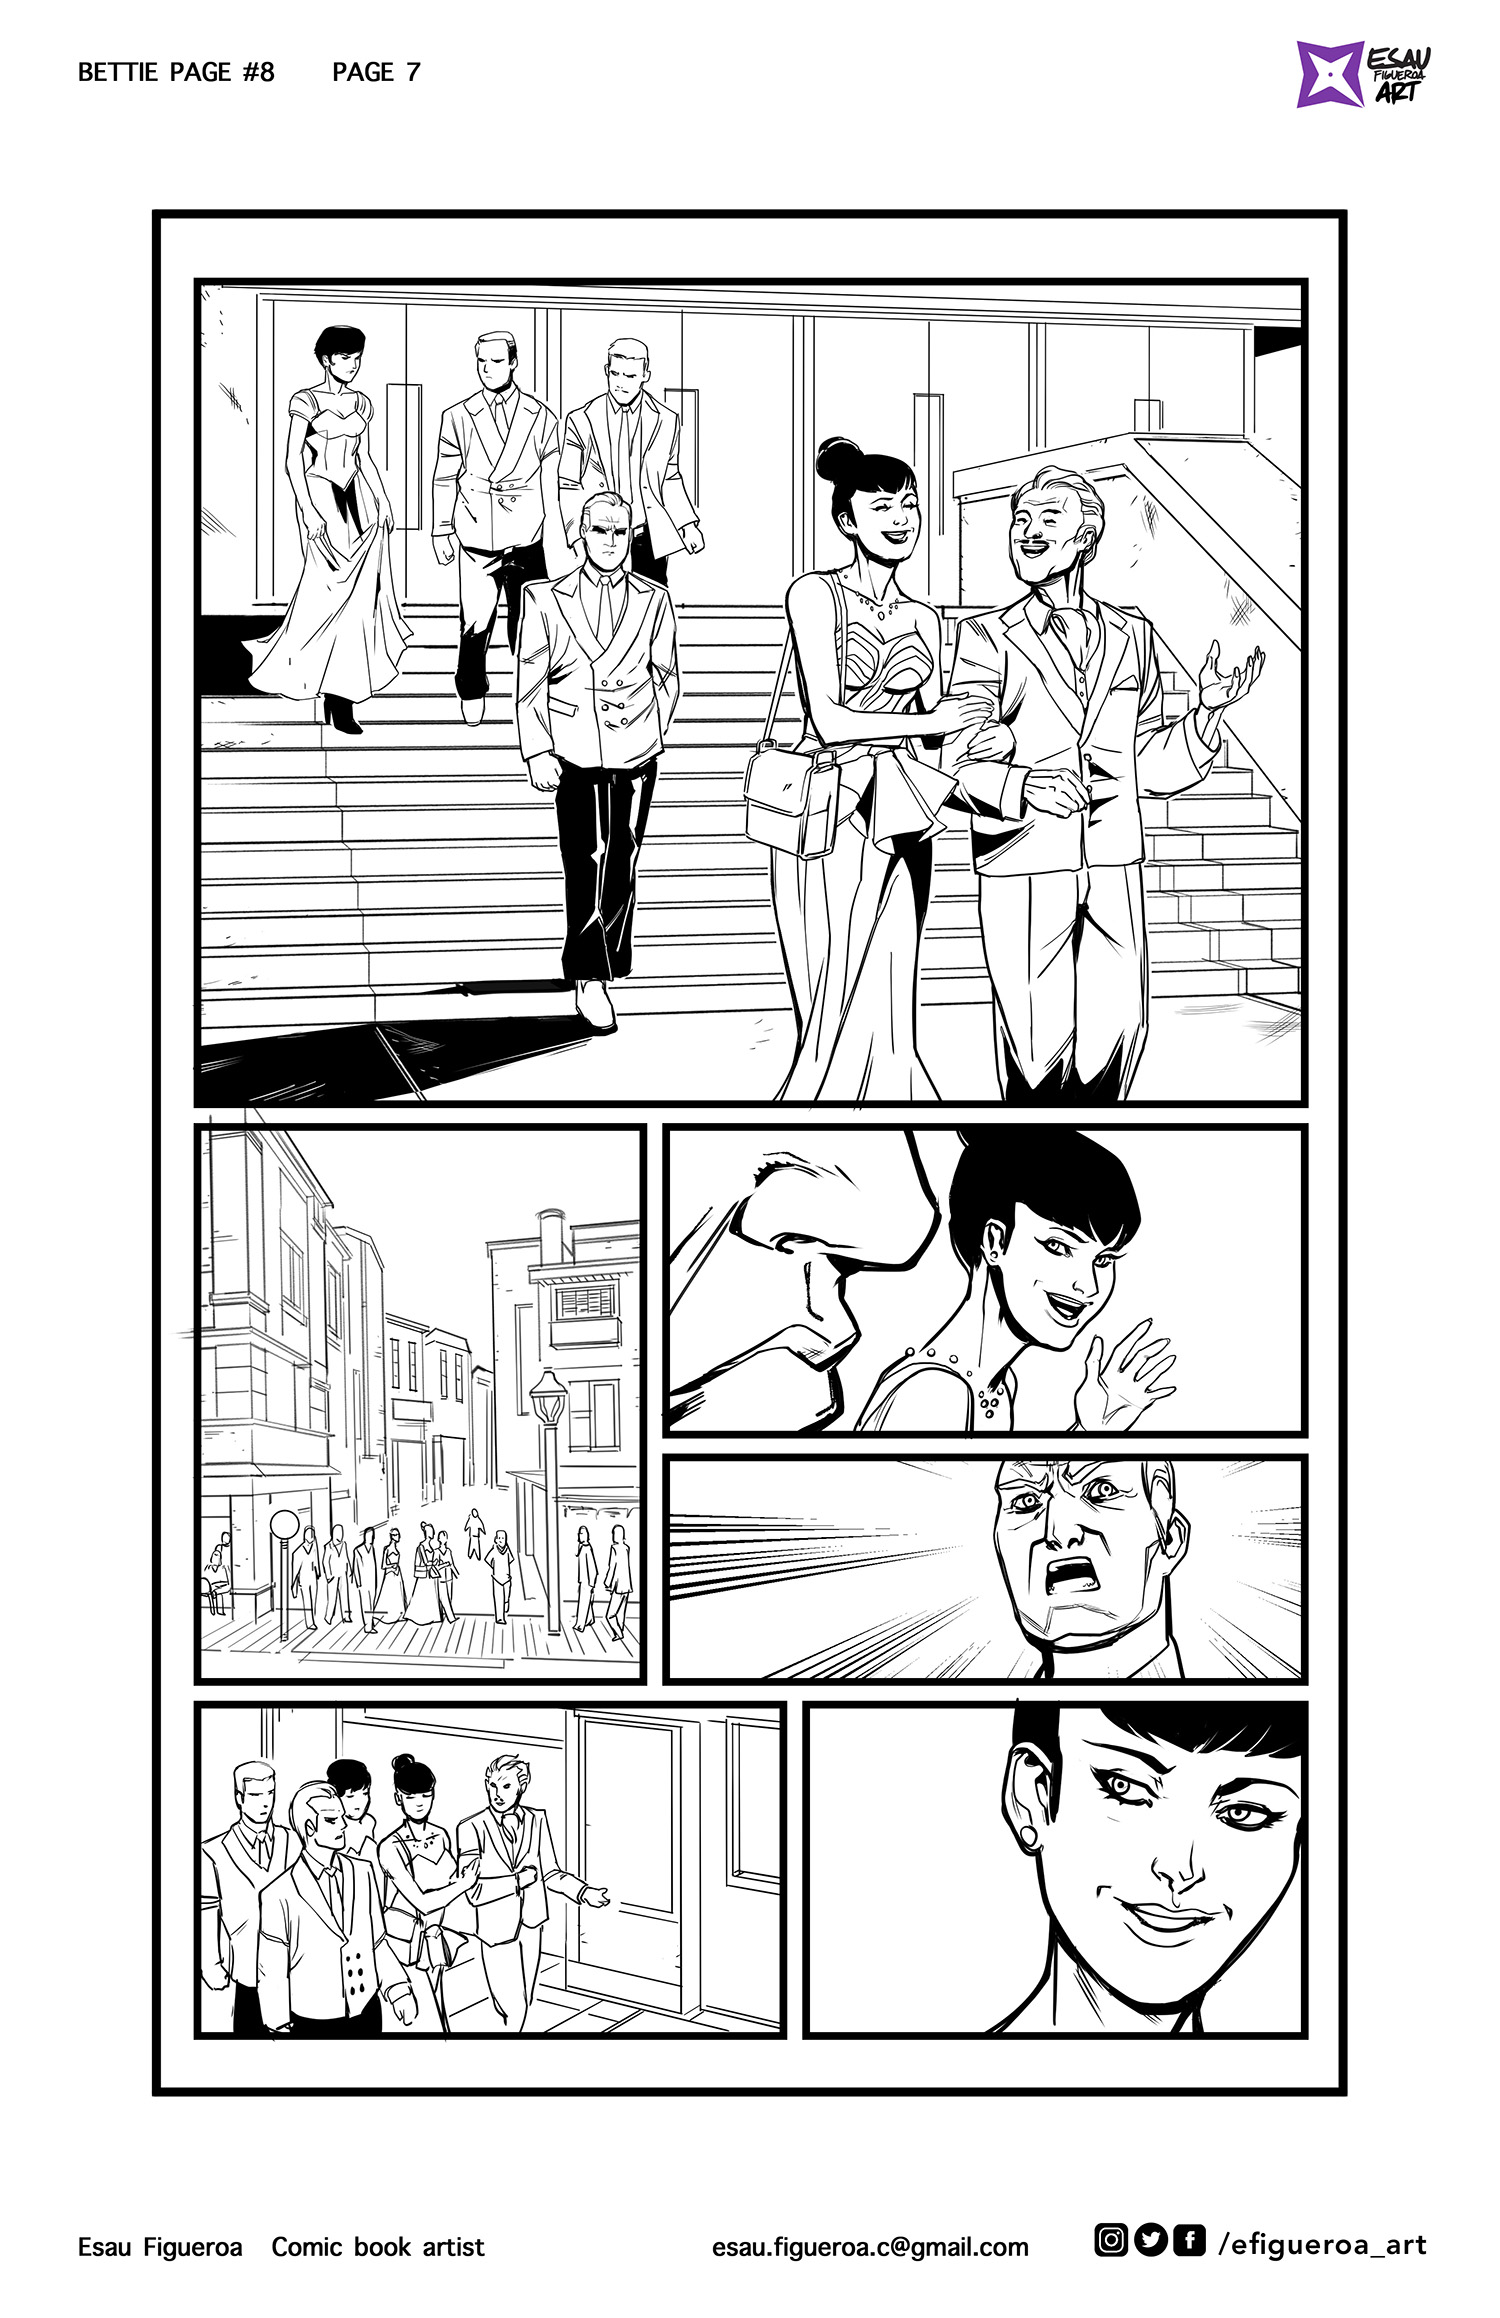 Bettie Page #8 pg. 7